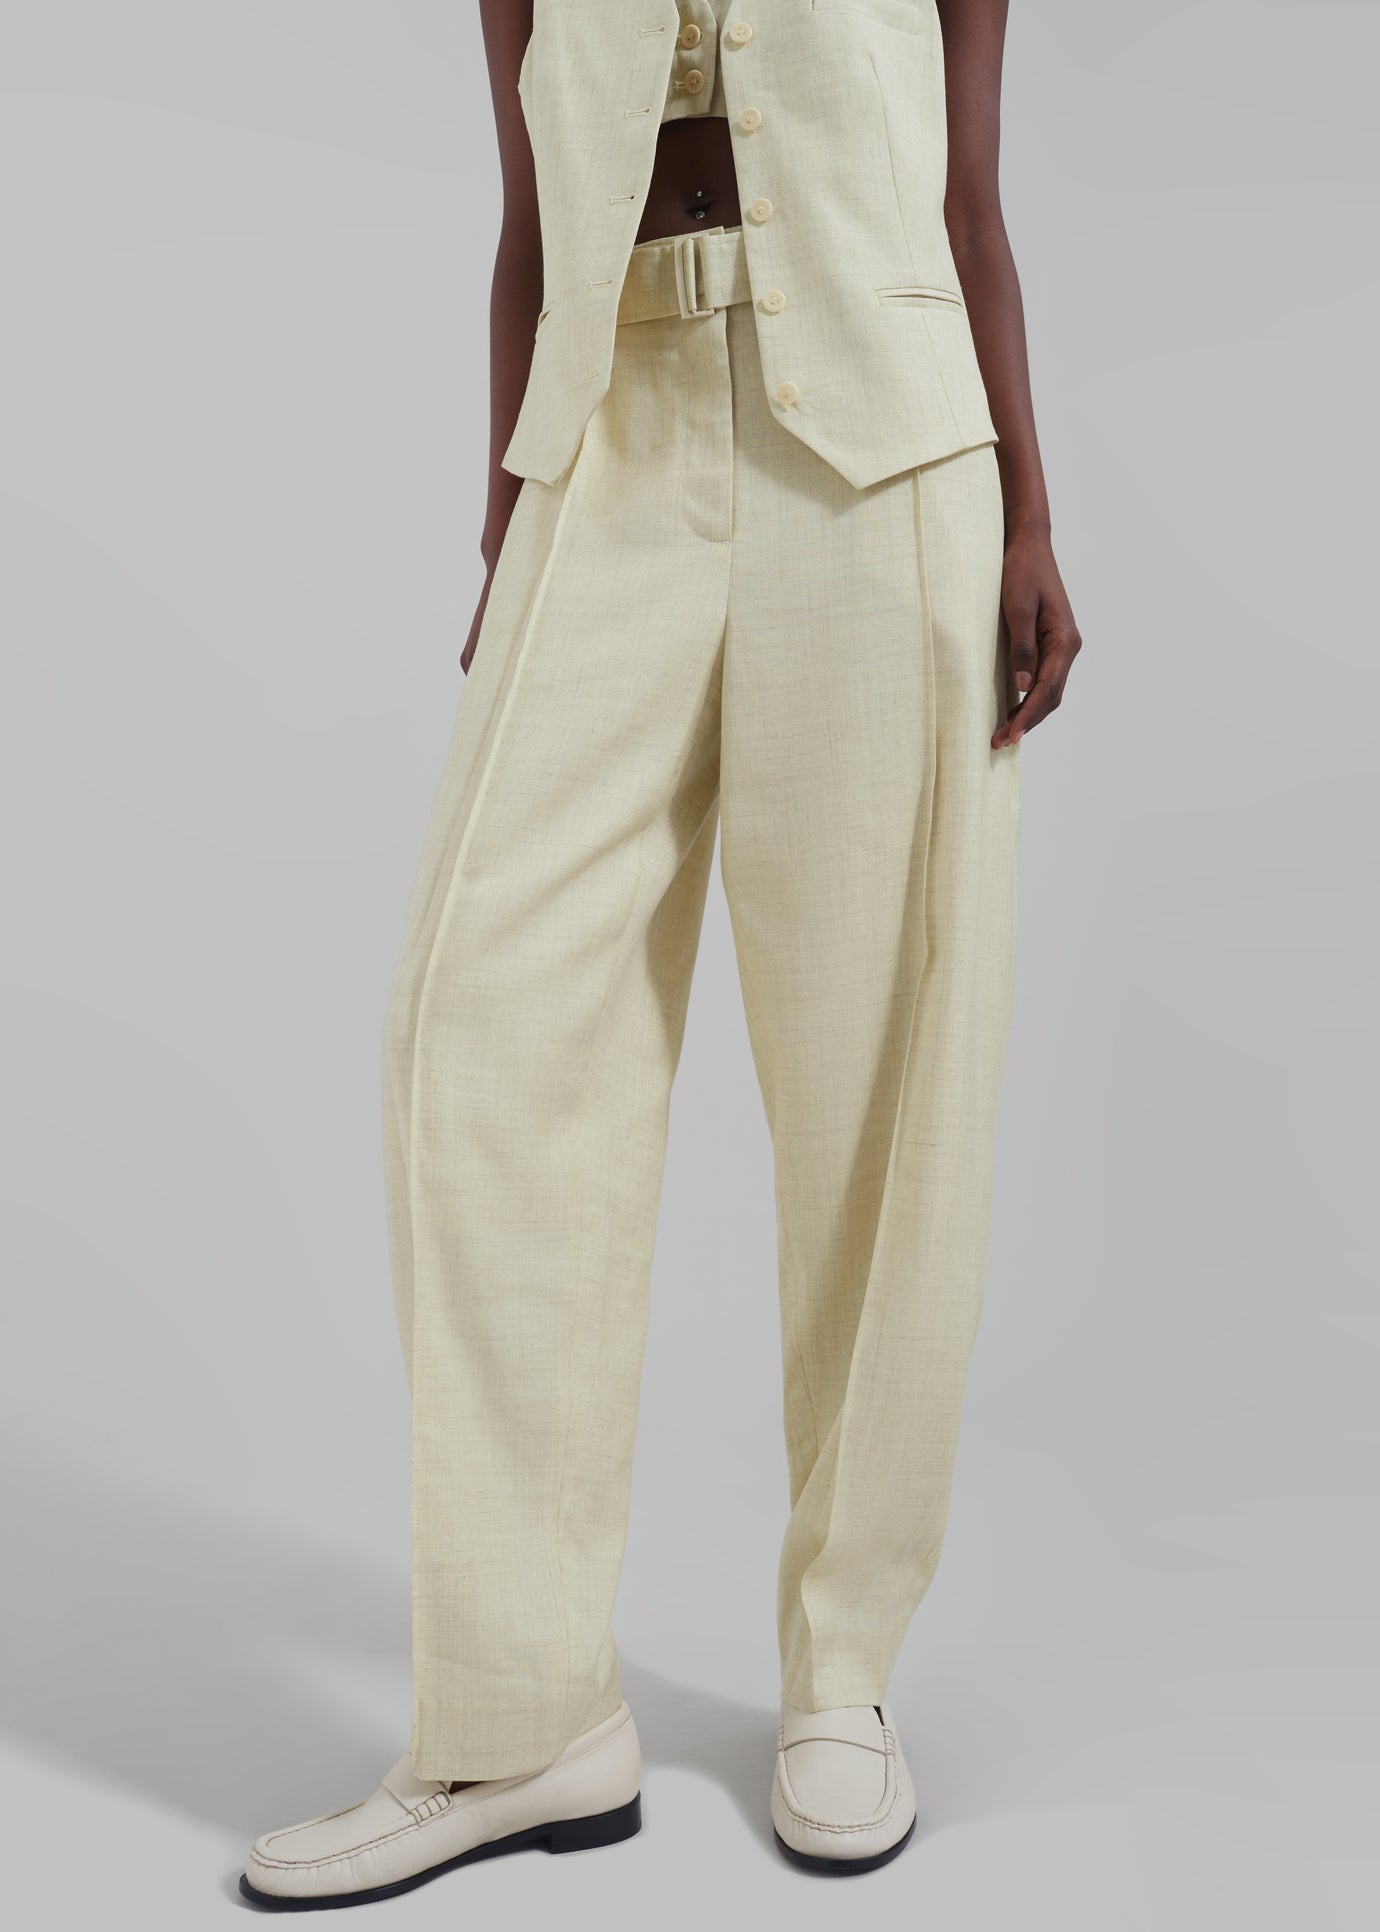 3.1 Phillip Lim Tailored Belted Tapered Trousers - Limoncello - 1